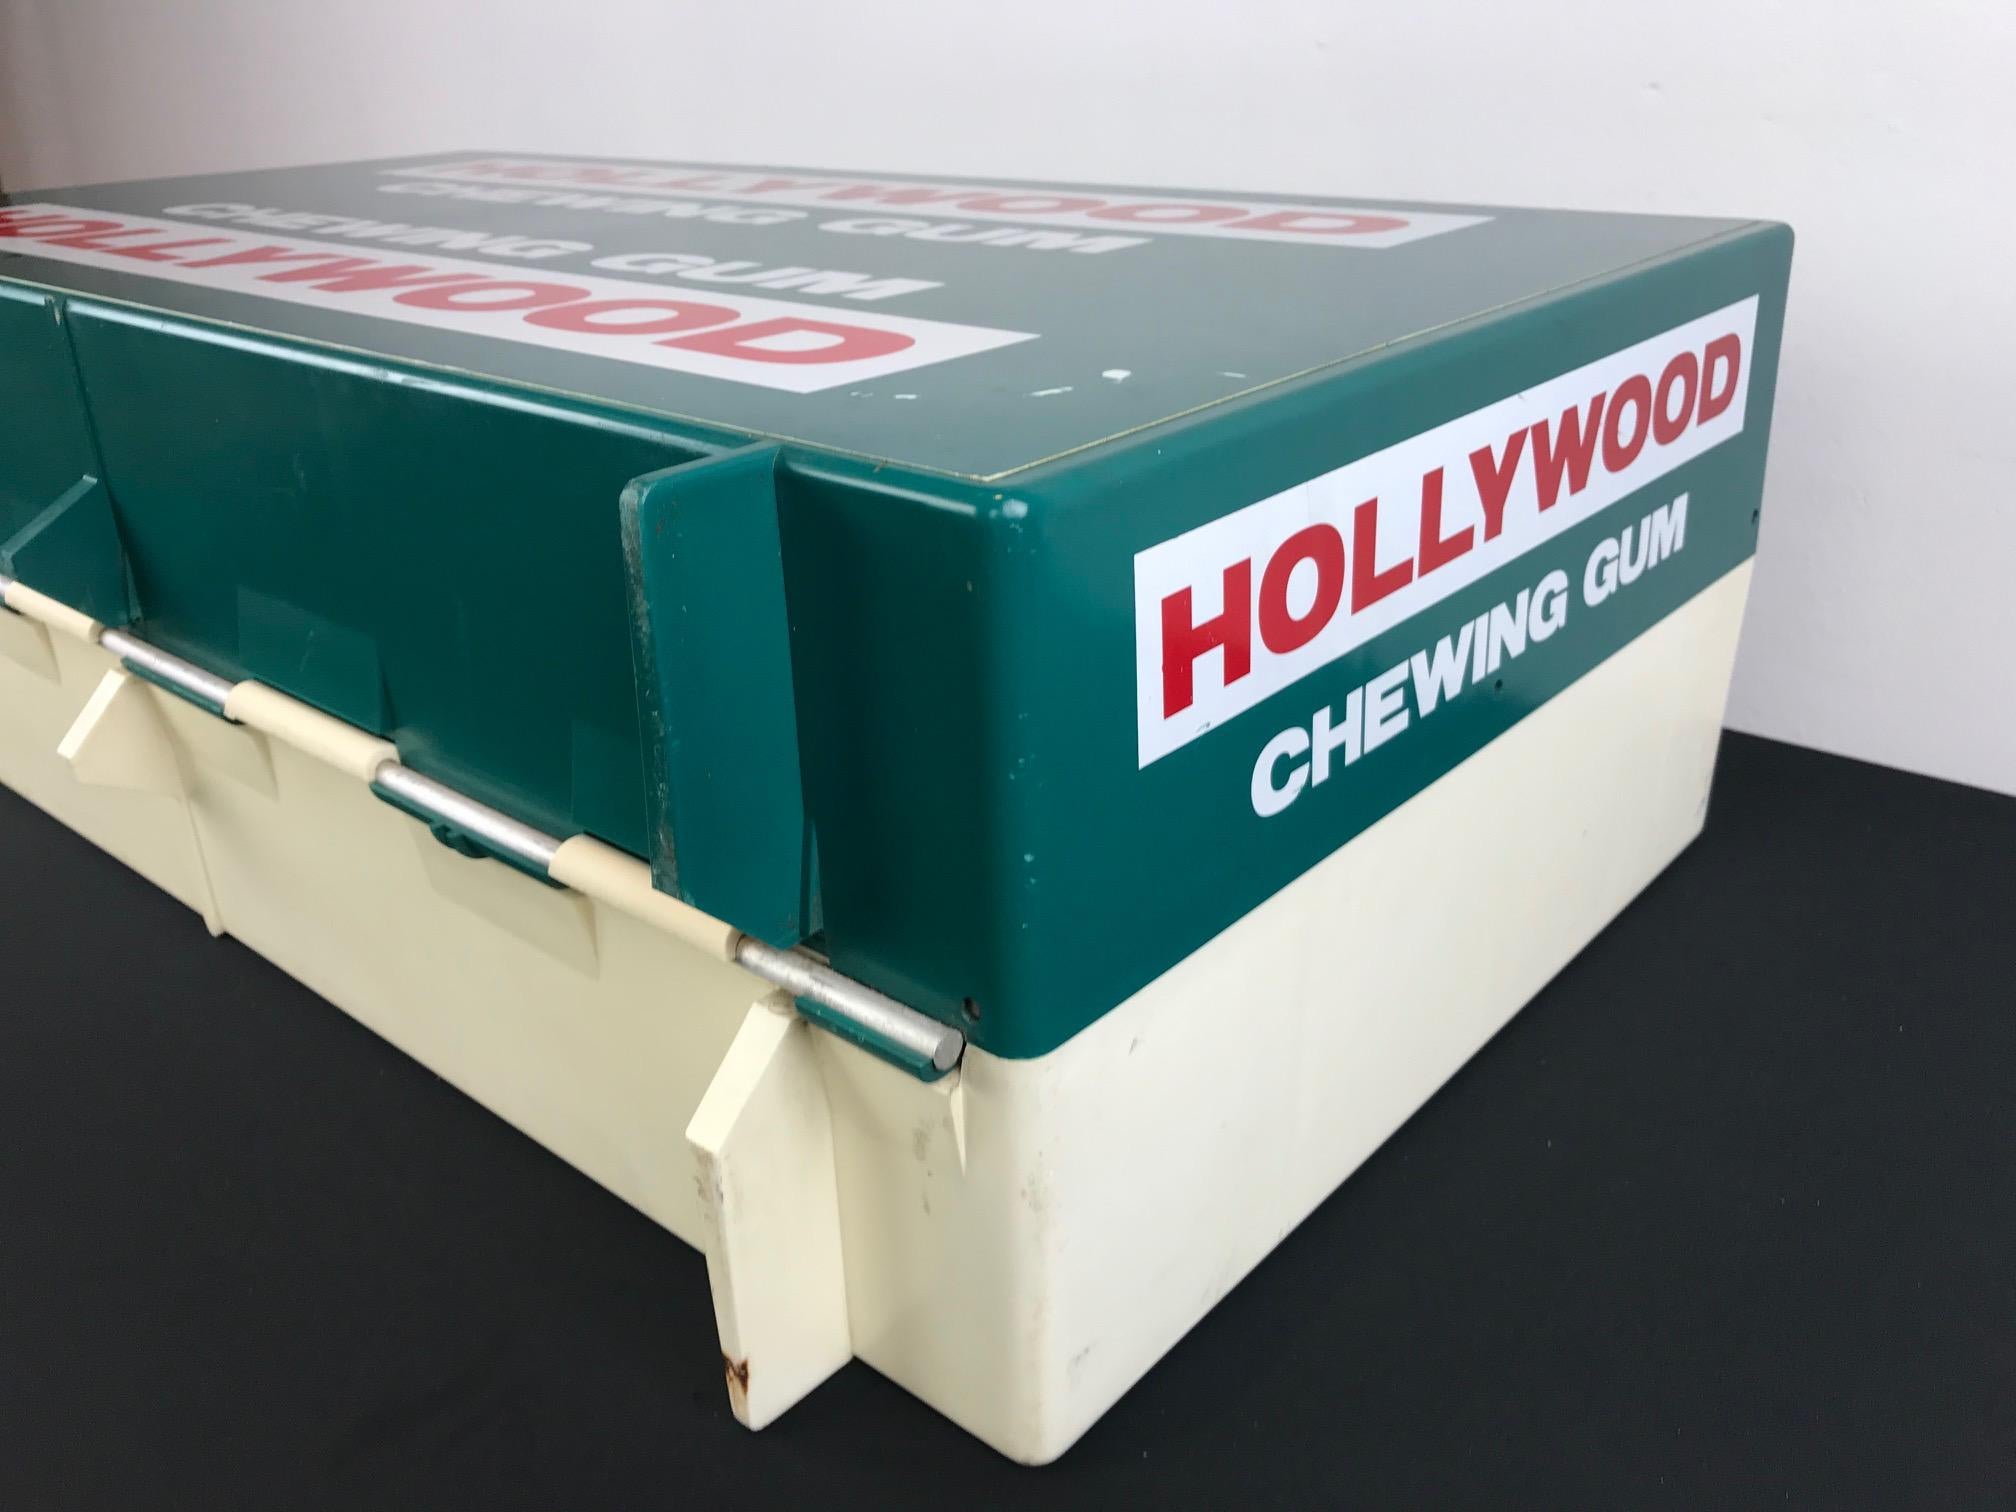 Large Hollywood Chewing Gum Advertising Display Suitcase For Sale 7